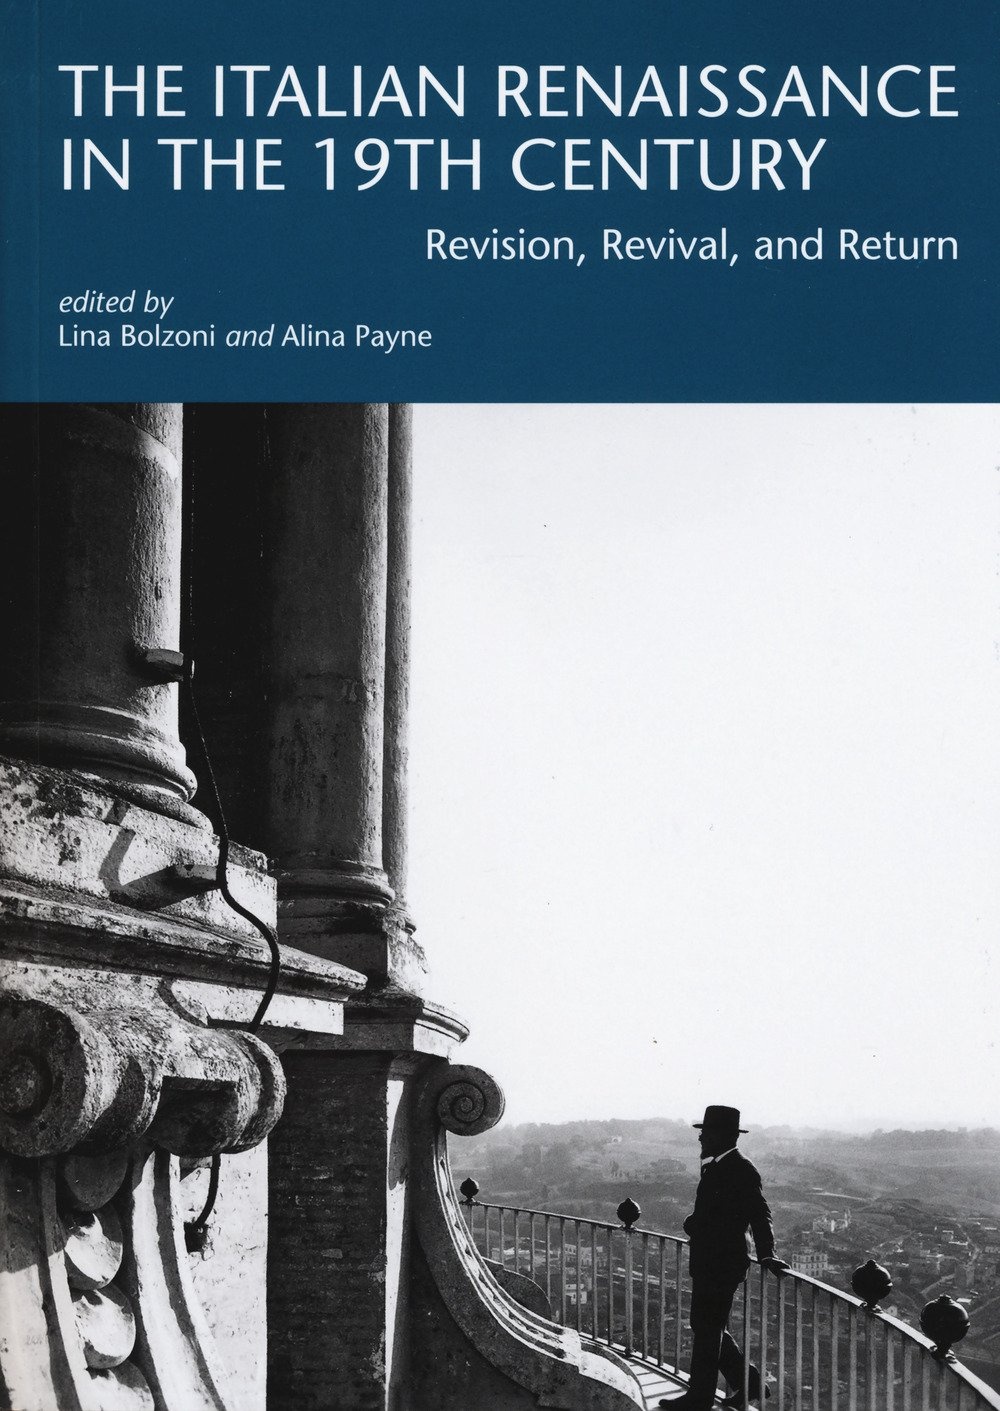 The Renaissance in the 19th Century. Revision, Revival, and Return